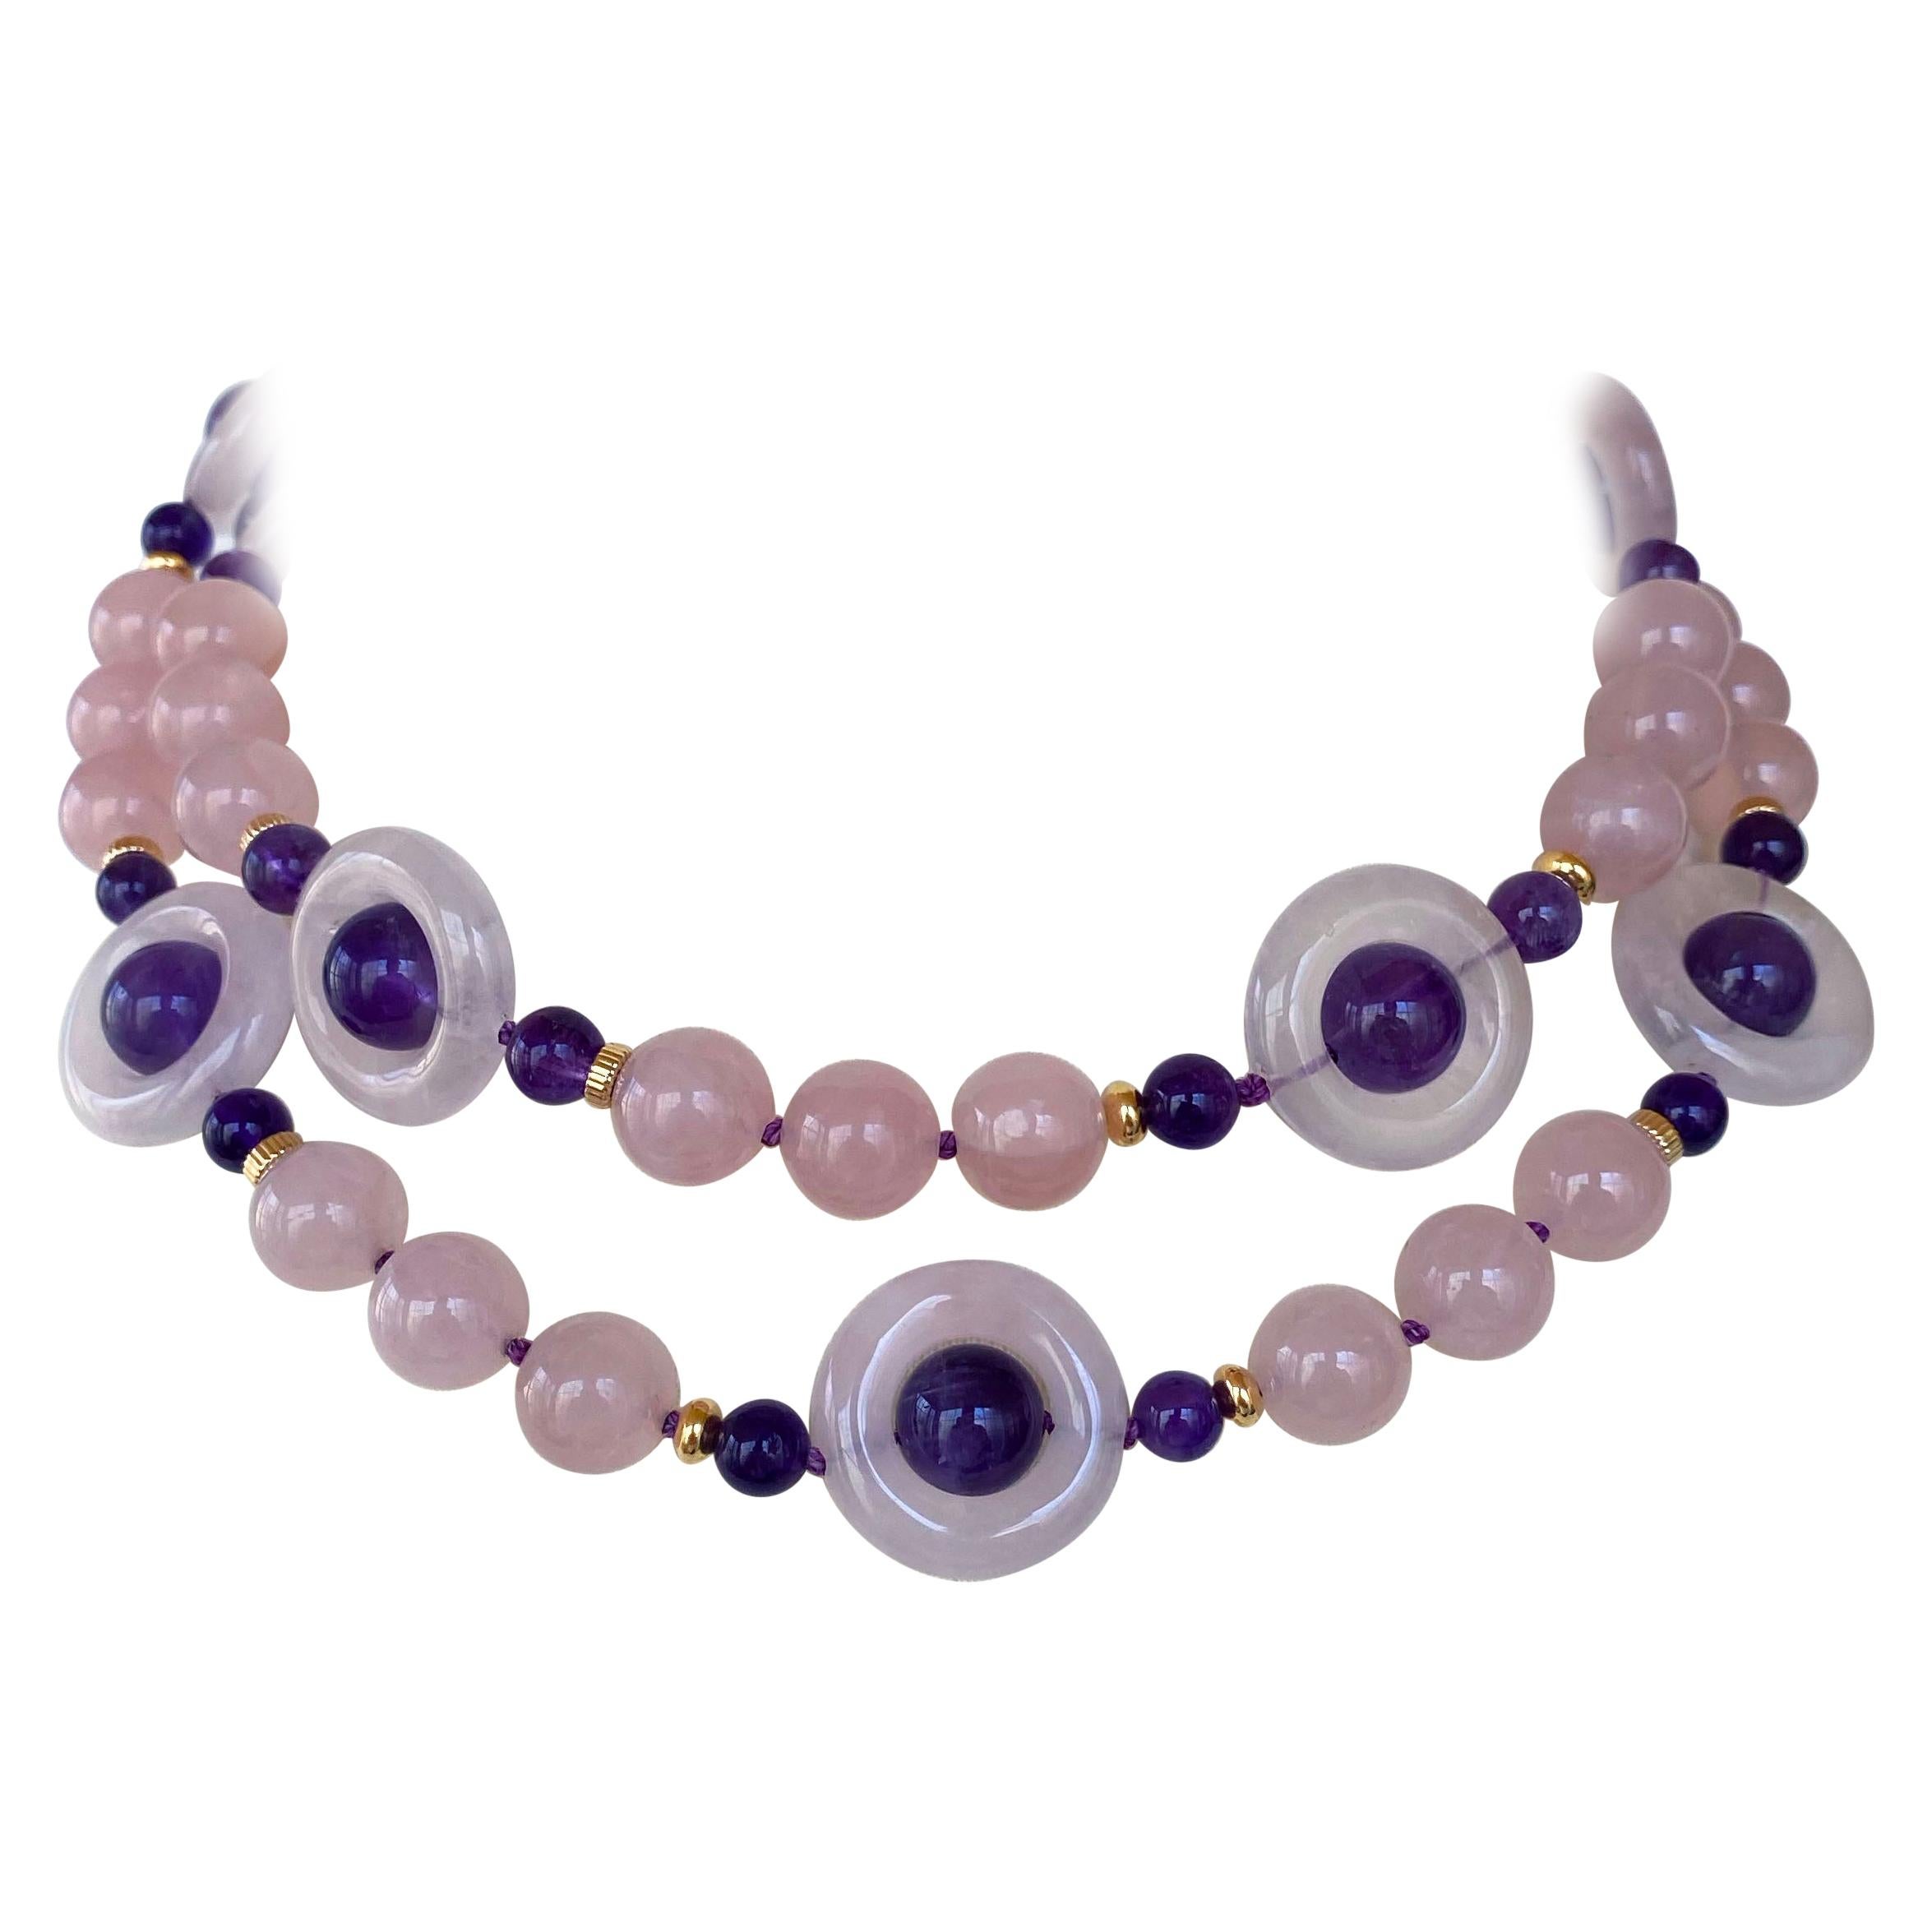 Marina J. Rose Quartz & Amethyst Necklace with Gold-Plated Toggle Clasp